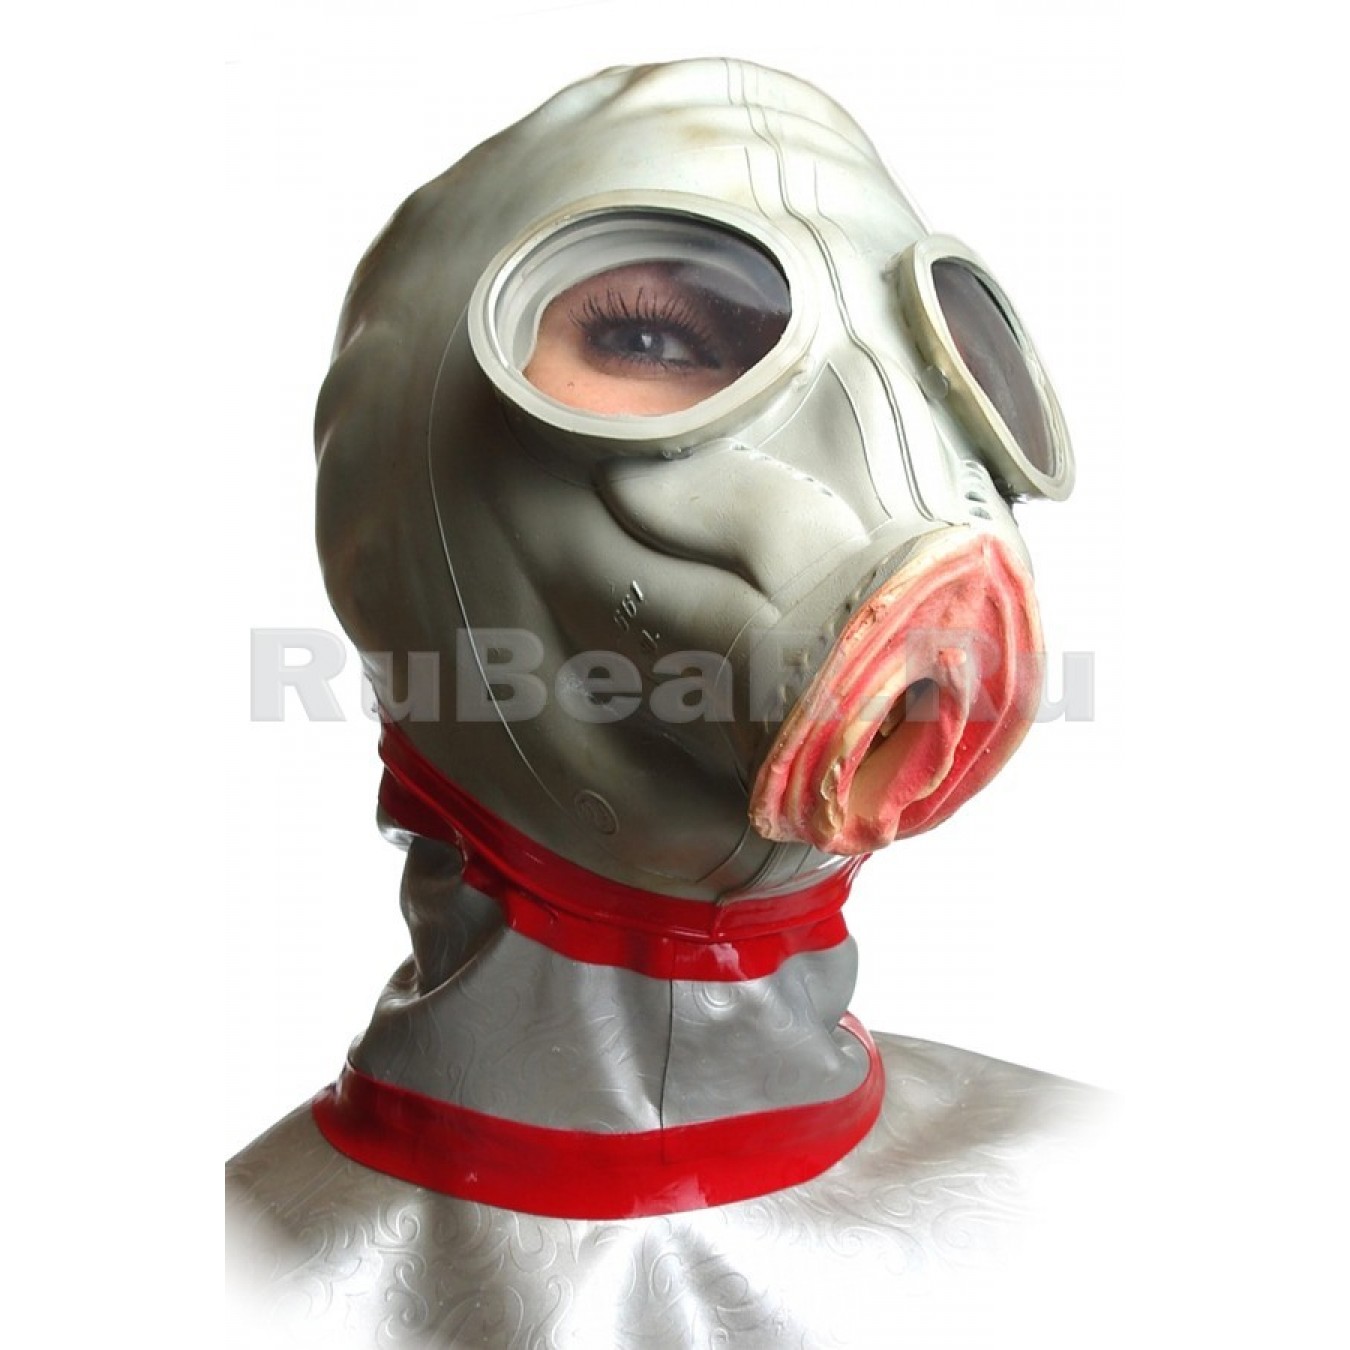 AS9211 Mask with vagina